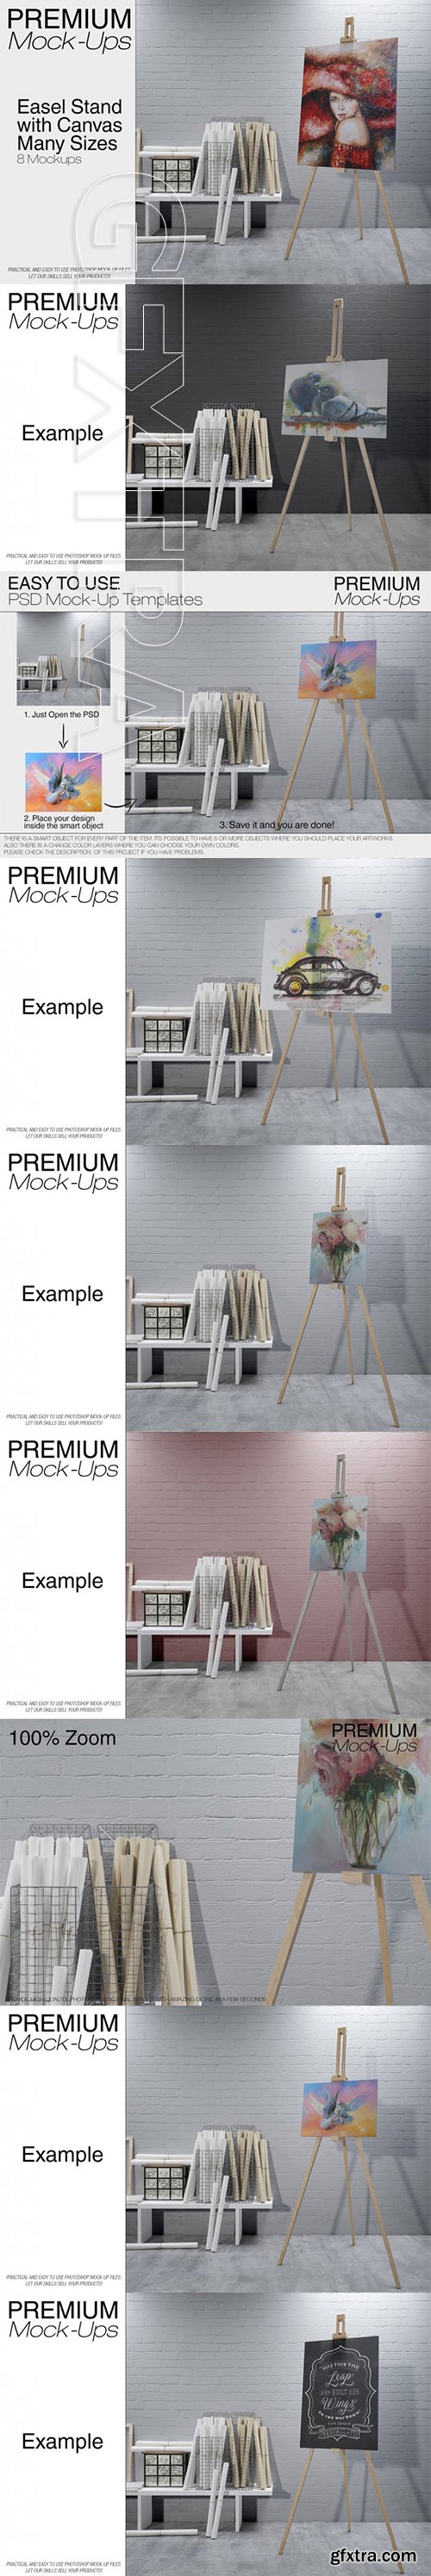 Easel Stand with Canvas - Many Sizes